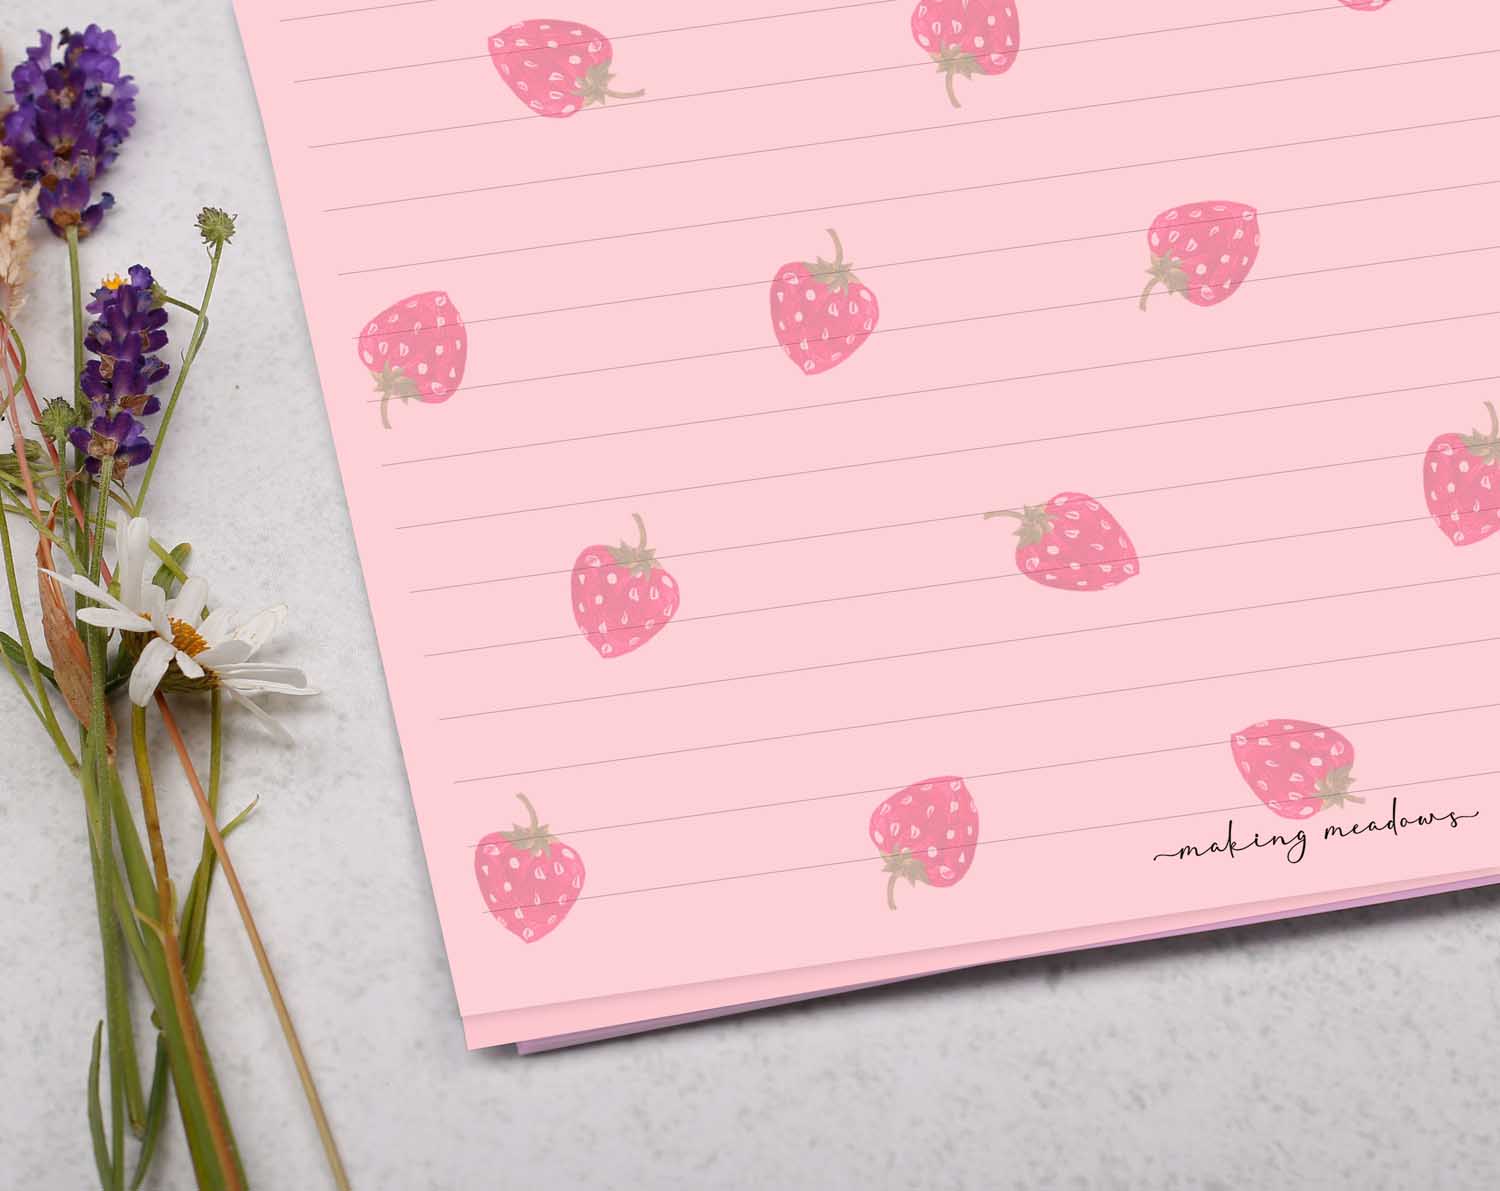 Pink A4 letter writing paper sheets with a traditional french design. 